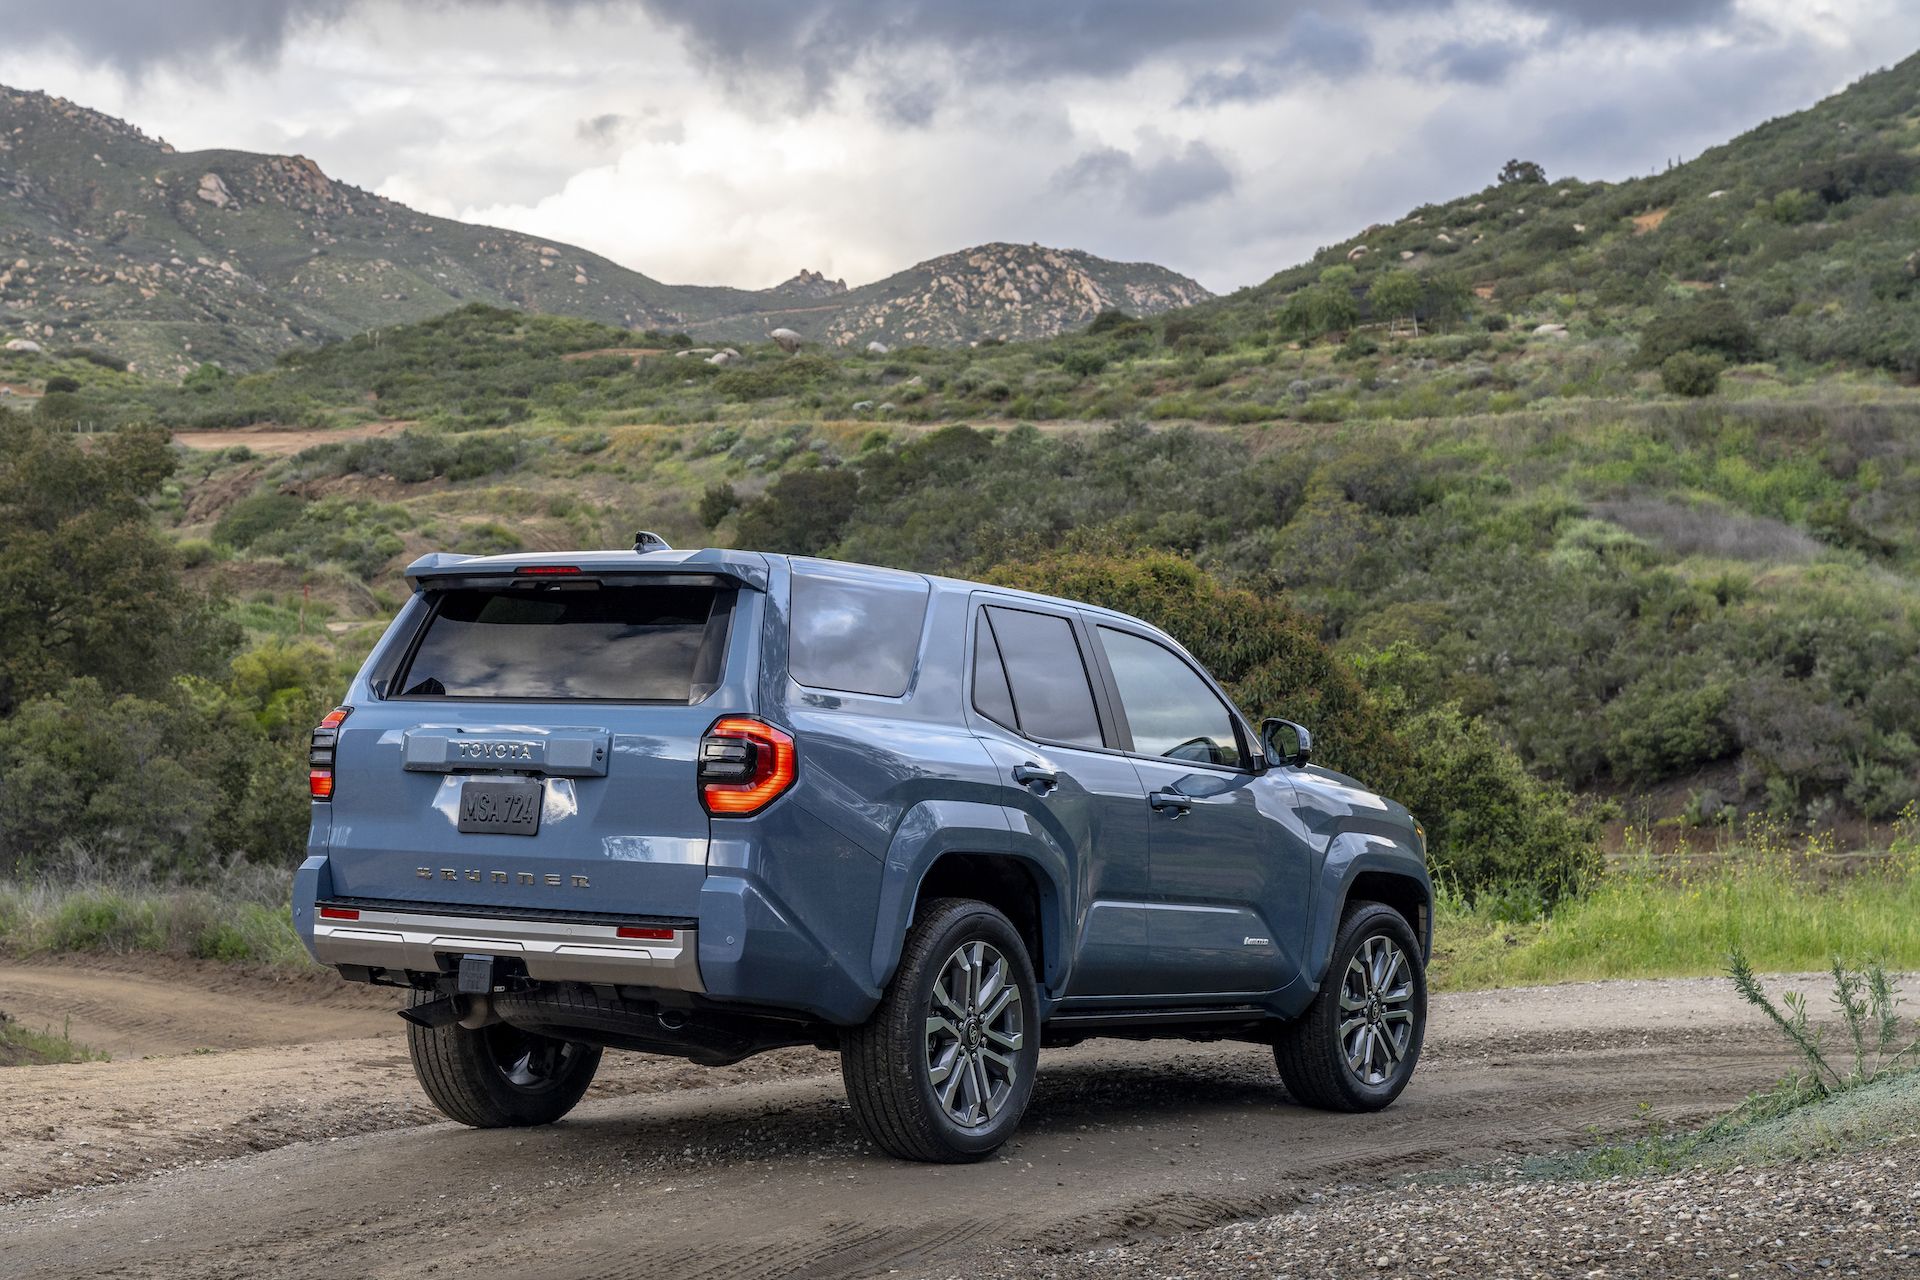 2025 Toyota 4runner Photos: 2025 4Runner LIMITED (Interior, Cargo Space, Exterior) in Heritage Blue color 2025-toyota-4runner-limited-107-jpg-6615620ac4347